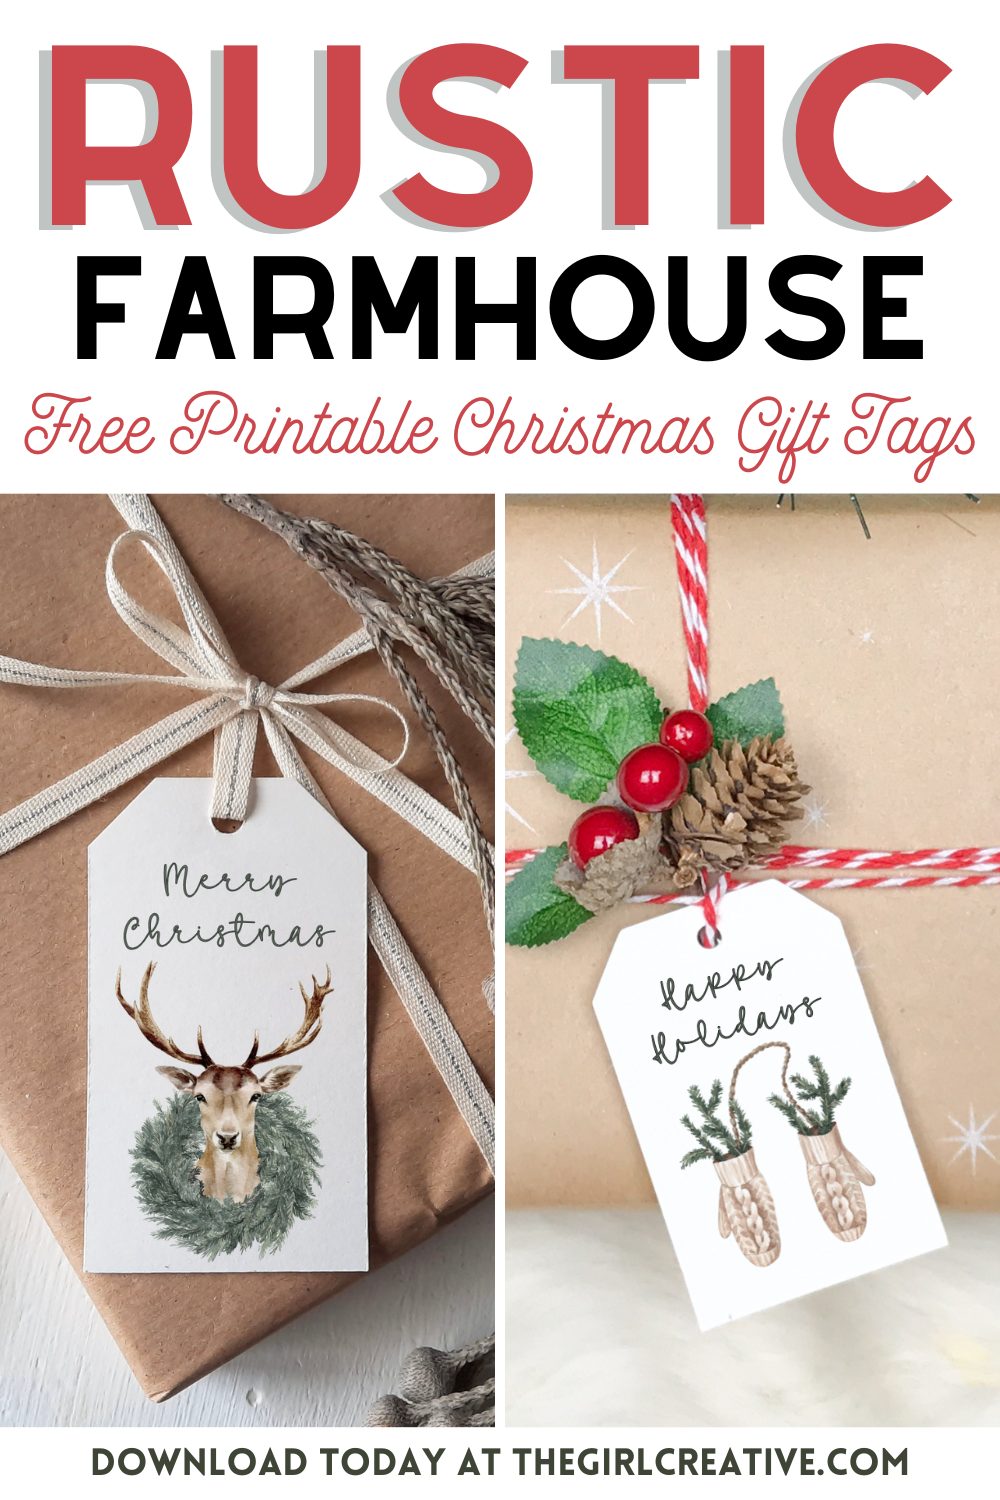 Rustic Kraft Christmas Tag Template, Instant download